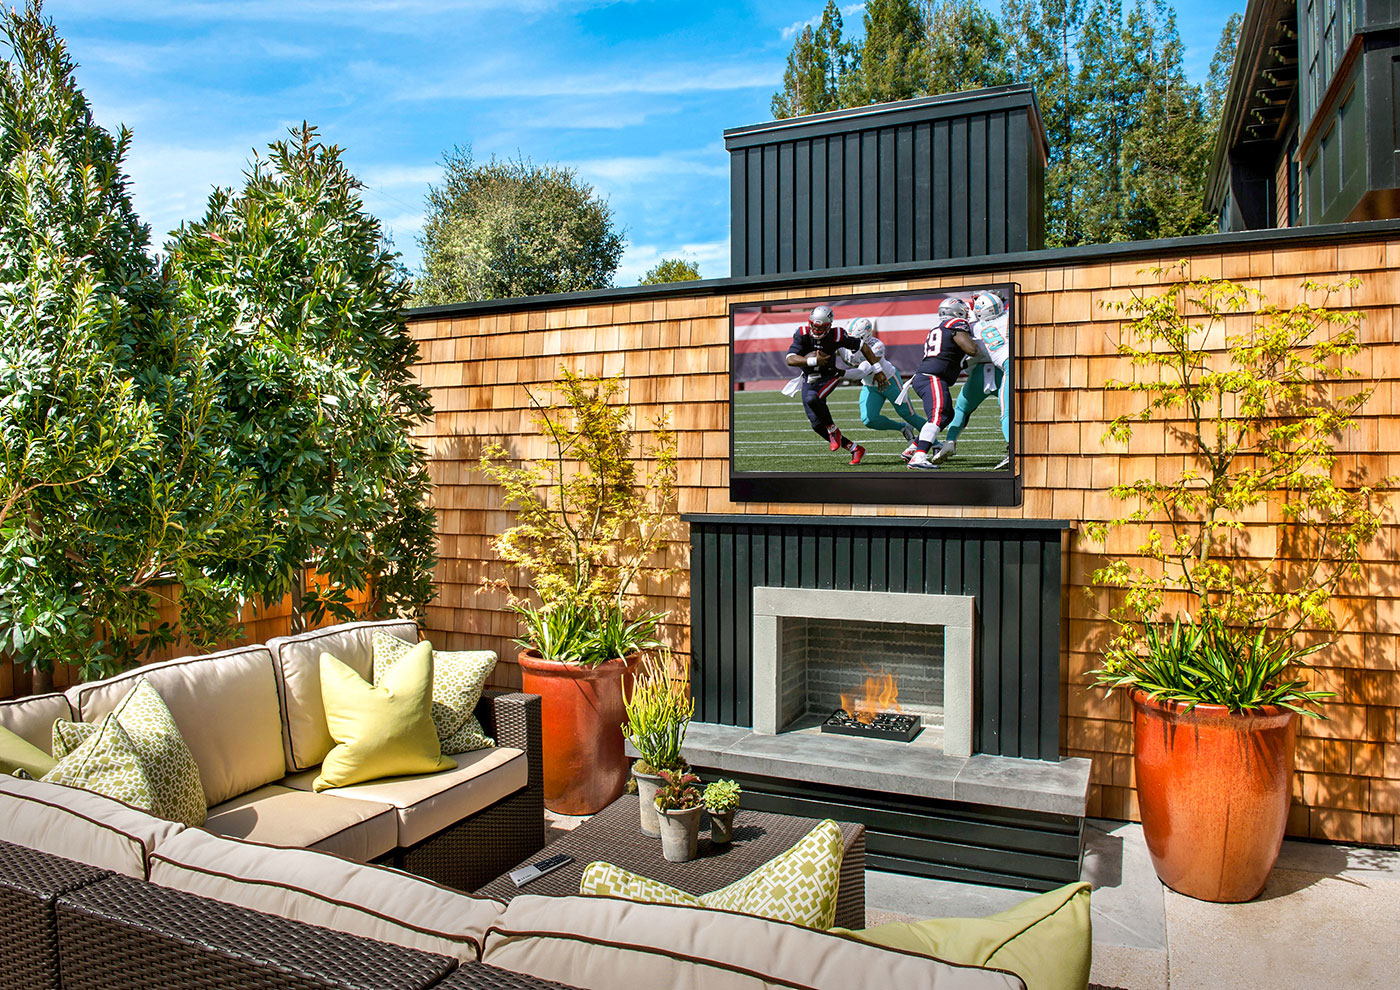 Seura Outdoor TV, available at Elite Media Solutions